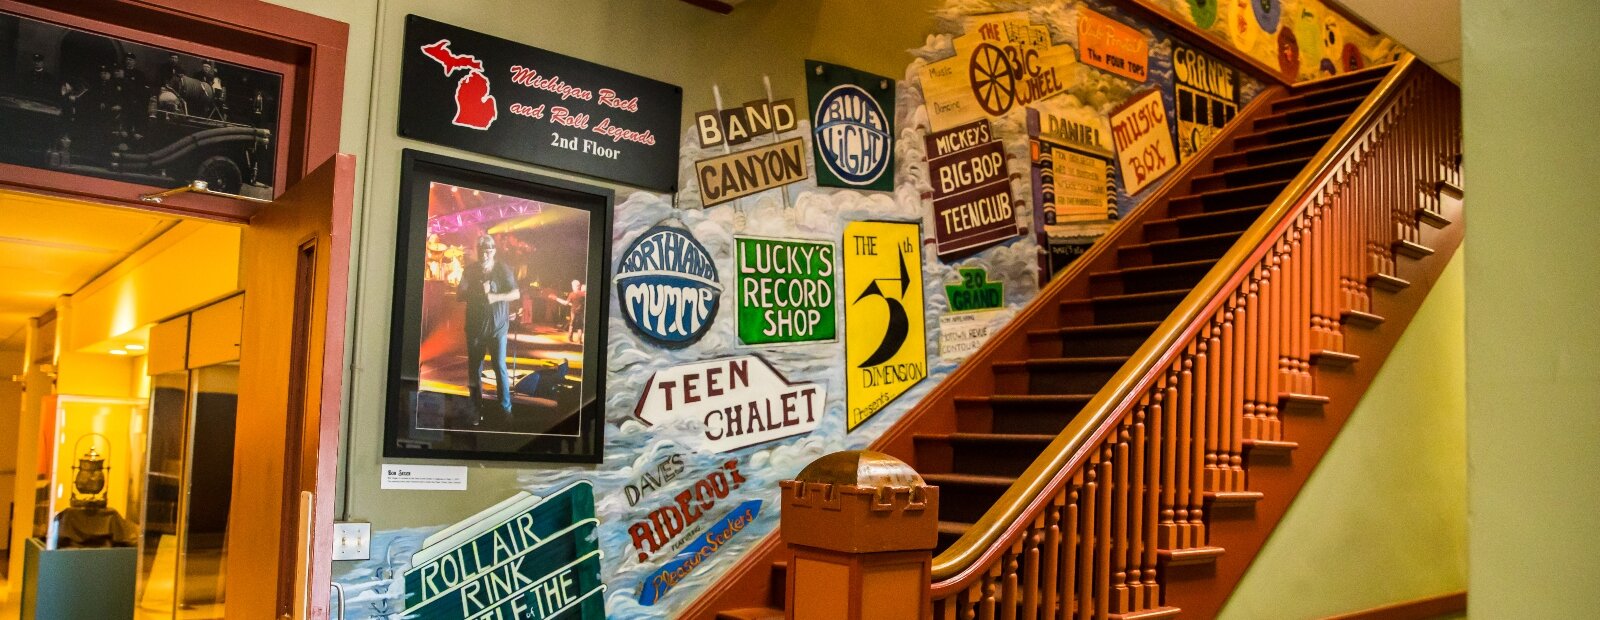 Inside the Historical Museum of Bay County, you'll find stories about everything from lumberjacks to rock and roll legends.